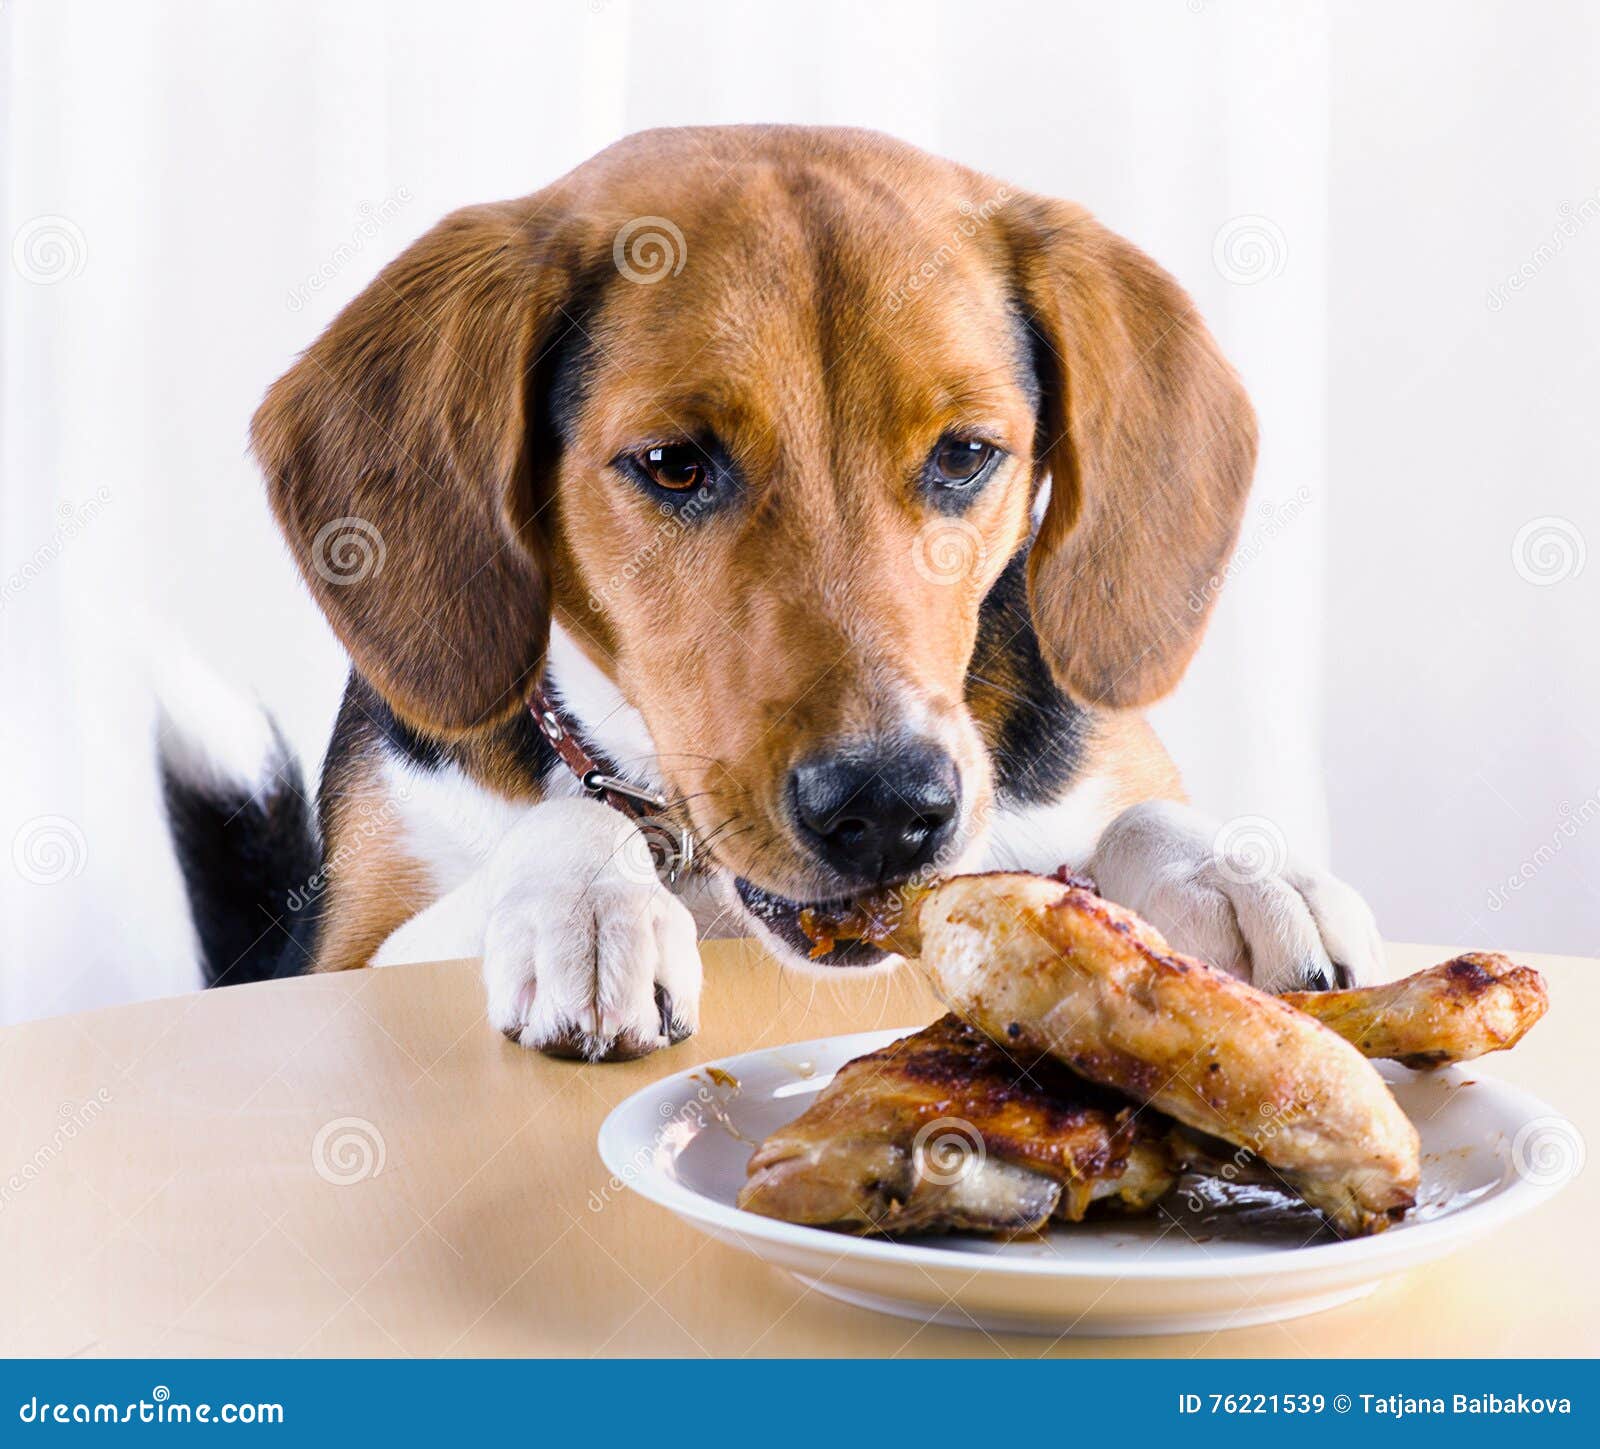 can dogs eat grilled chicken